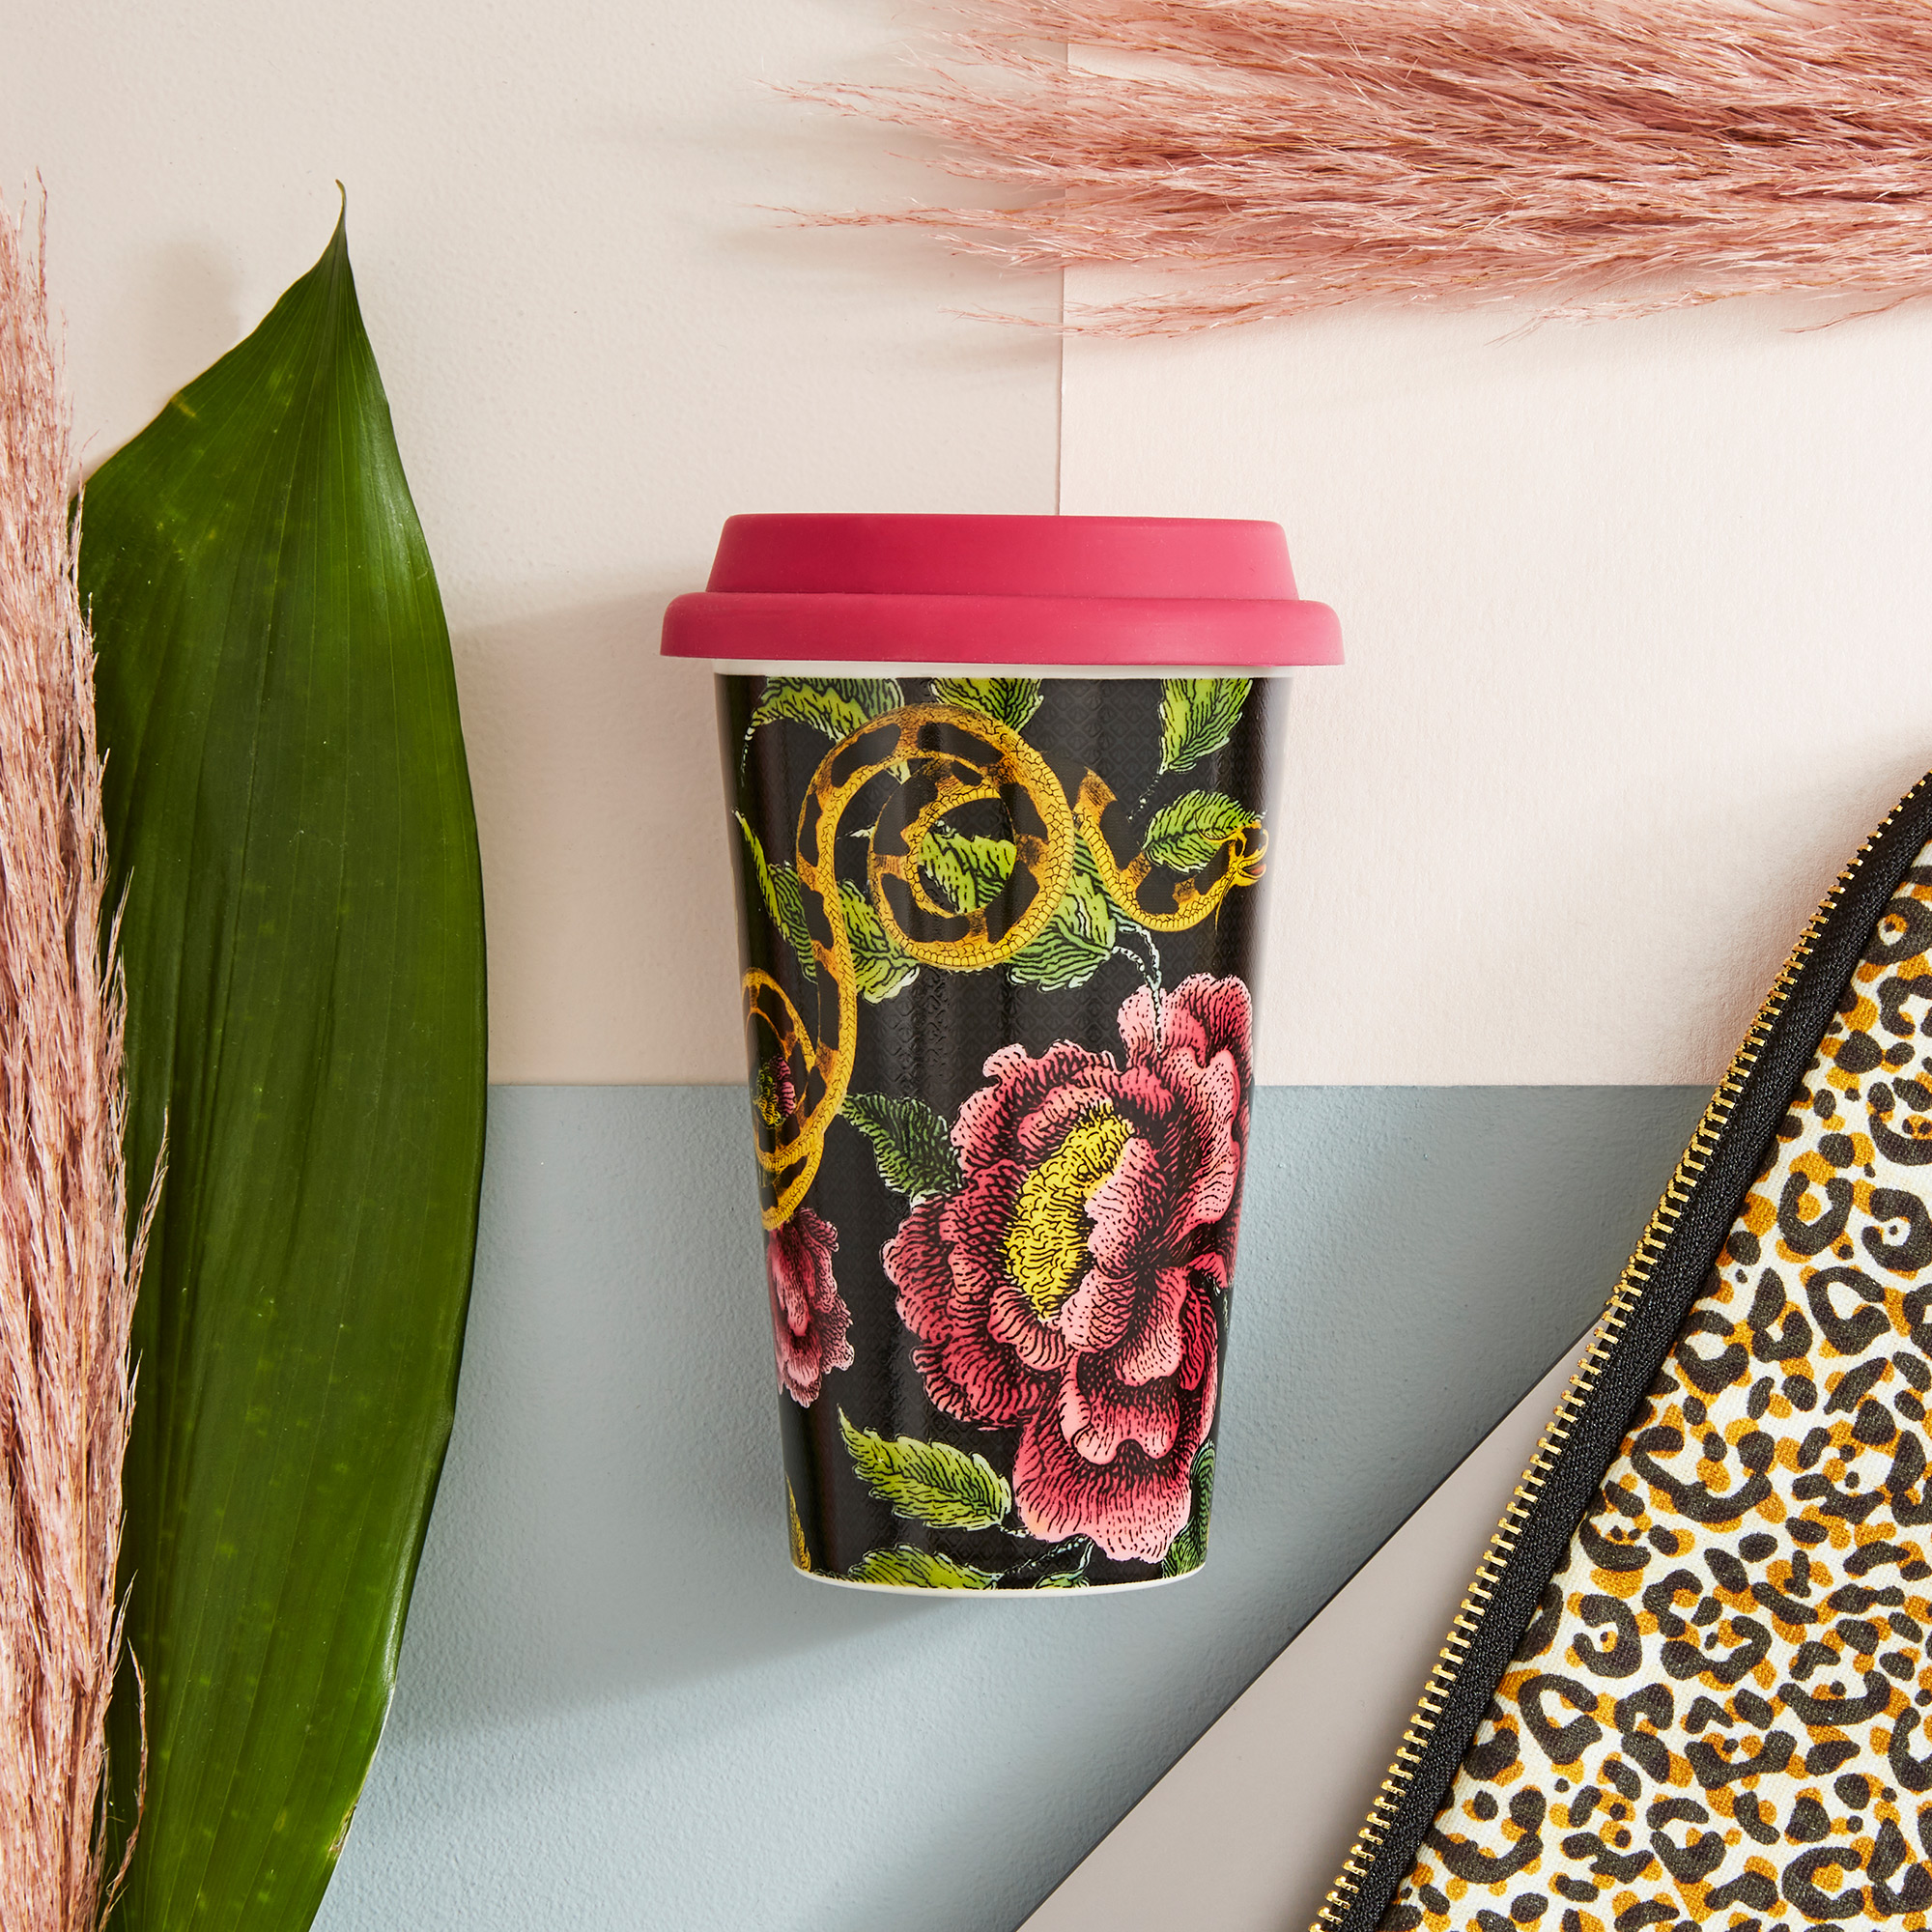 Spode Creatures of Curiosity 10-Ounce Travel Mug with Lid, Tumbler for  Coffee and Tea, Dishwasher and Microwave Safe, Dark Floral Motif